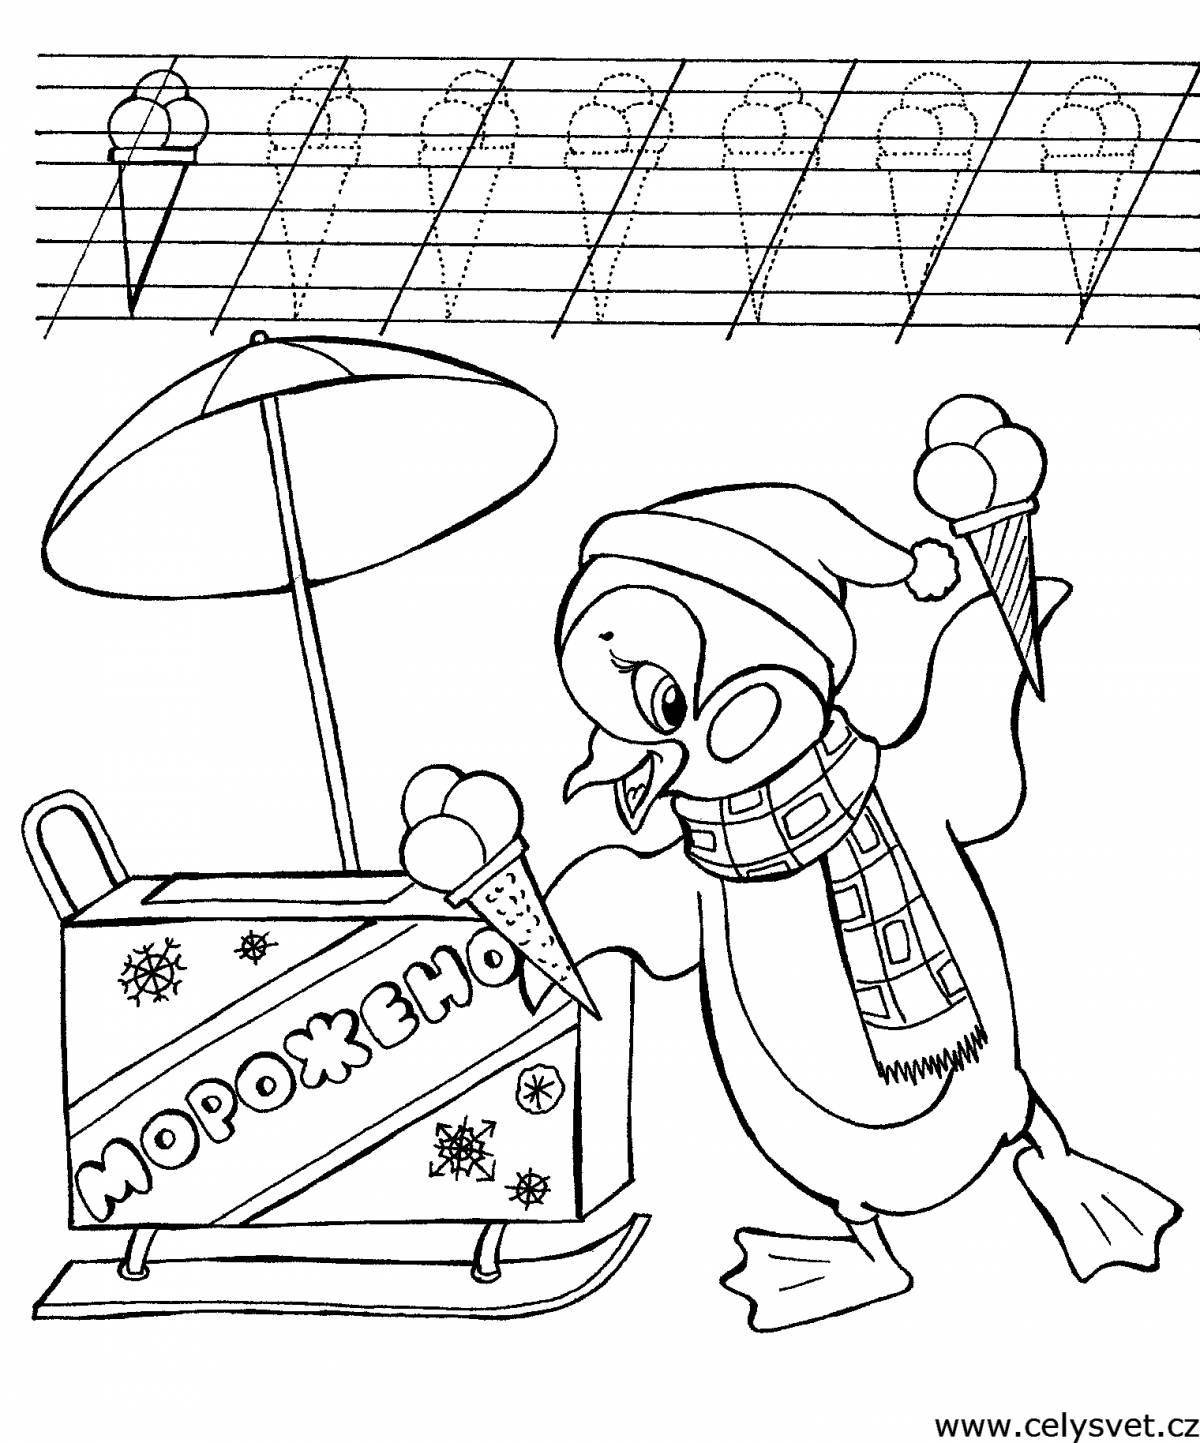 Smart fun coloring book for 6-7 year olds